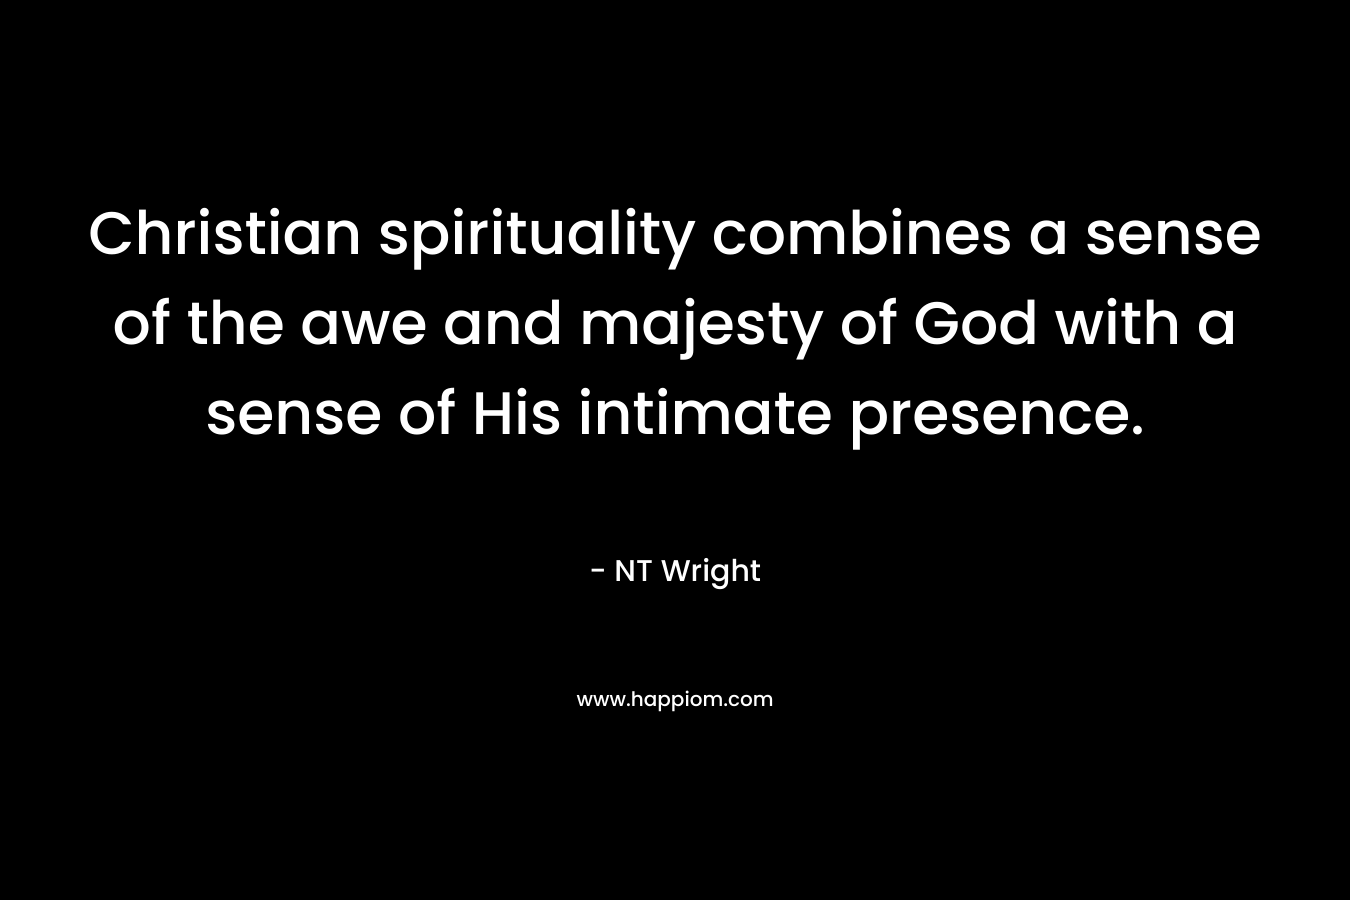 Christian spirituality combines a sense of the awe and majesty of God with a sense of His intimate presence.